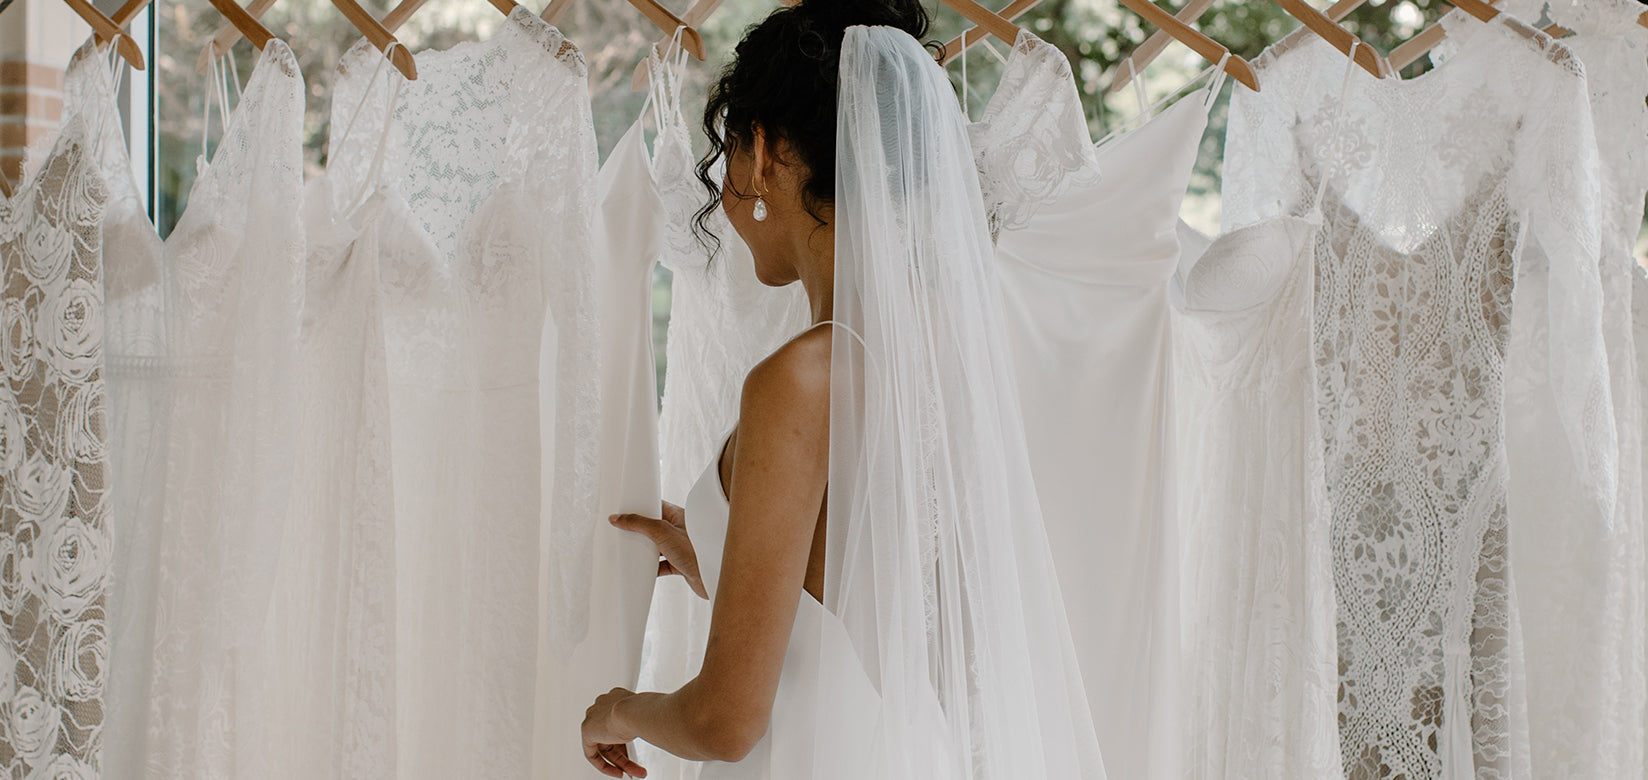 bride wearing wedding dressing looking at dresses hanging on a rail